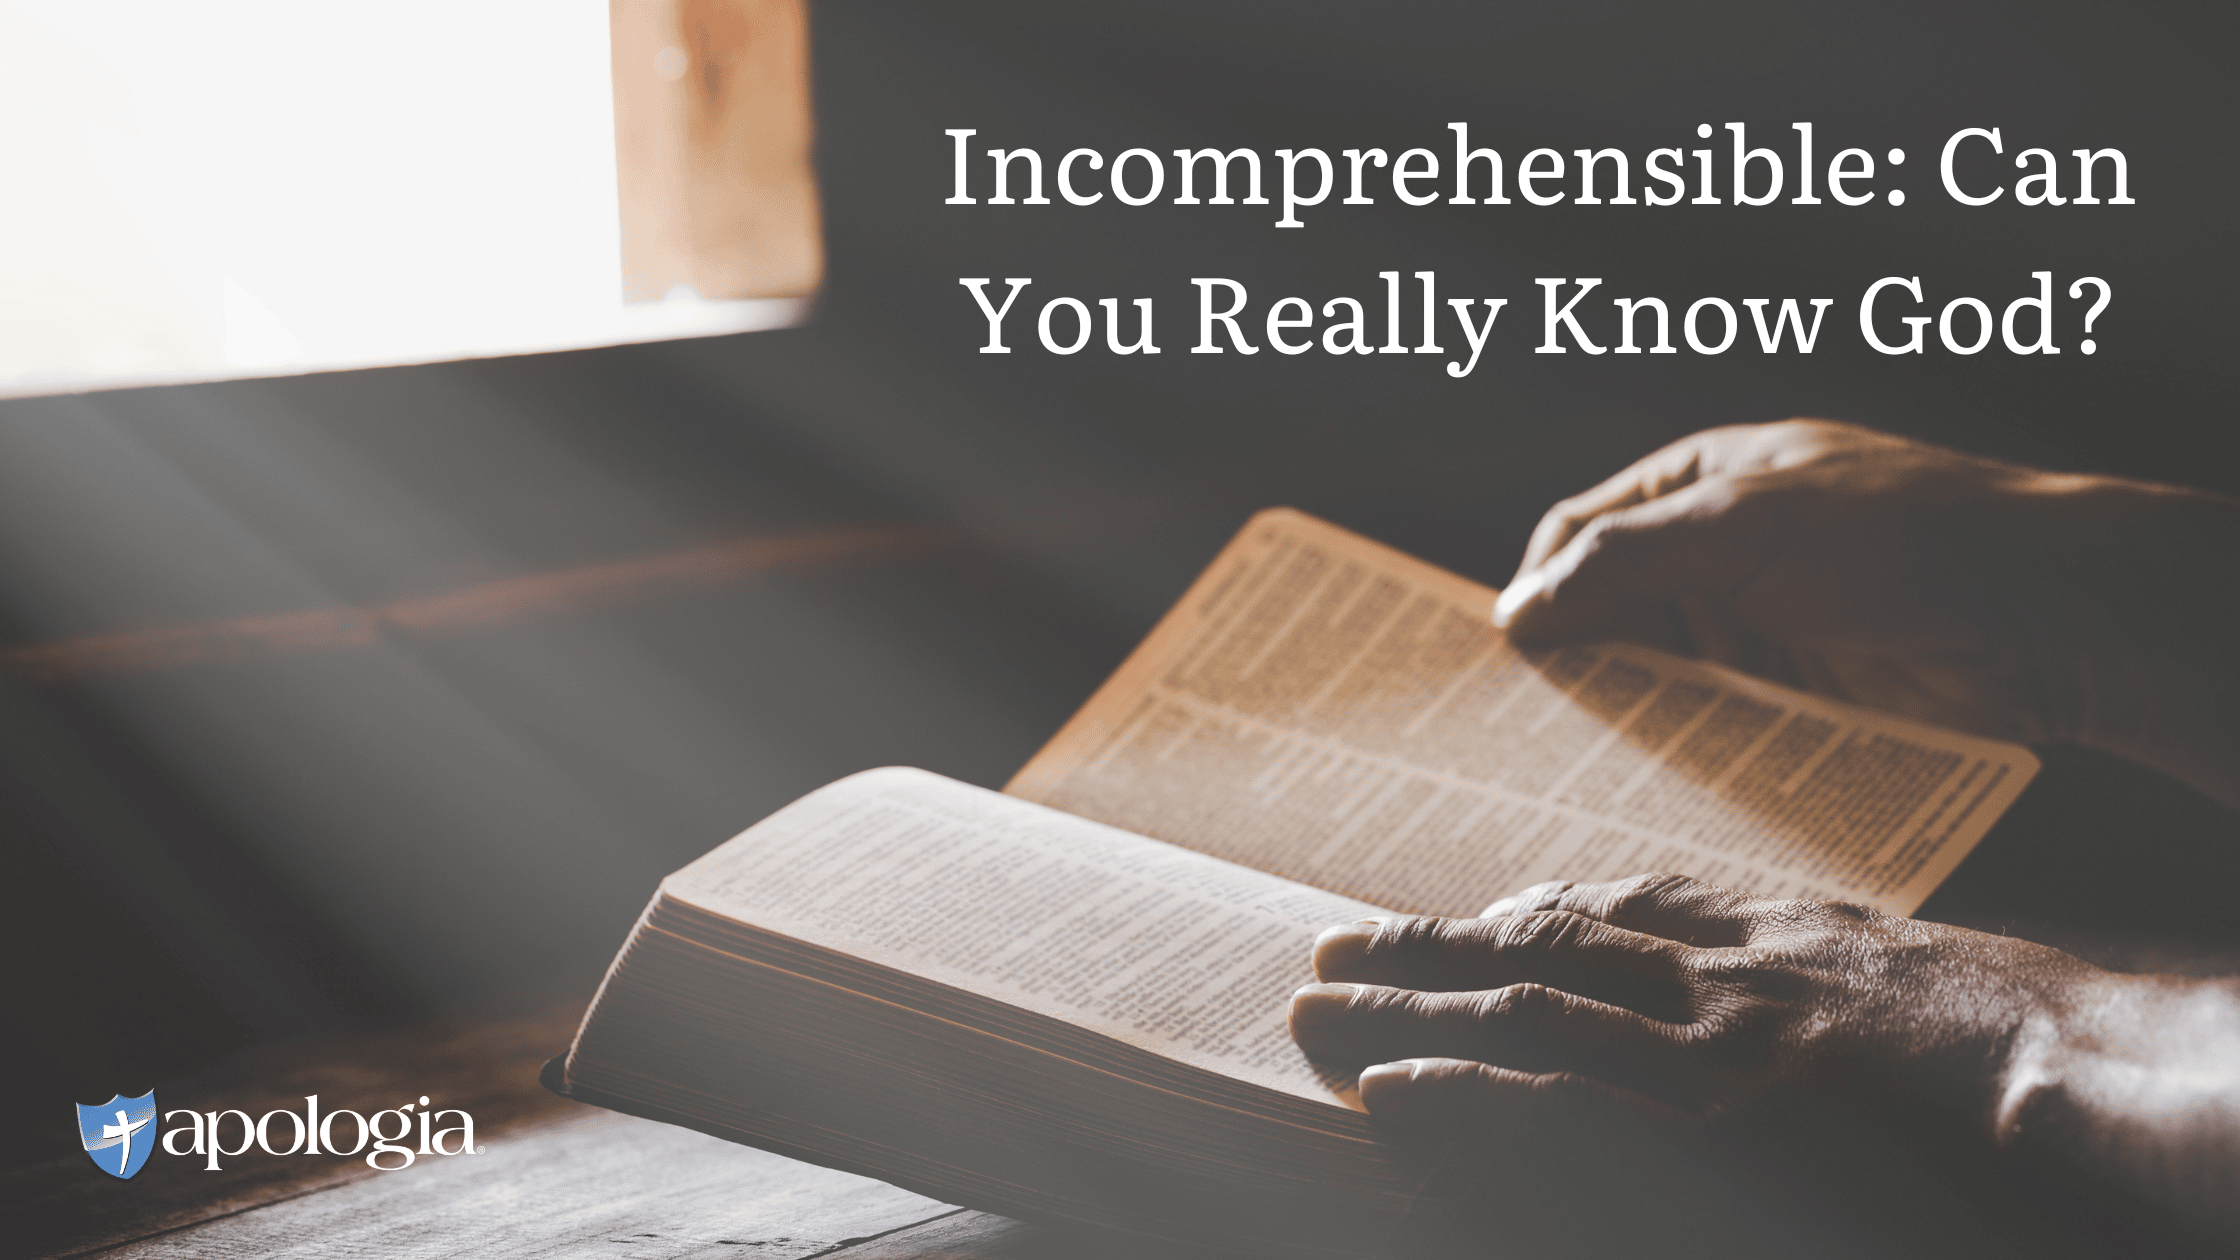 Incomprehensible: Can You Really Know God?